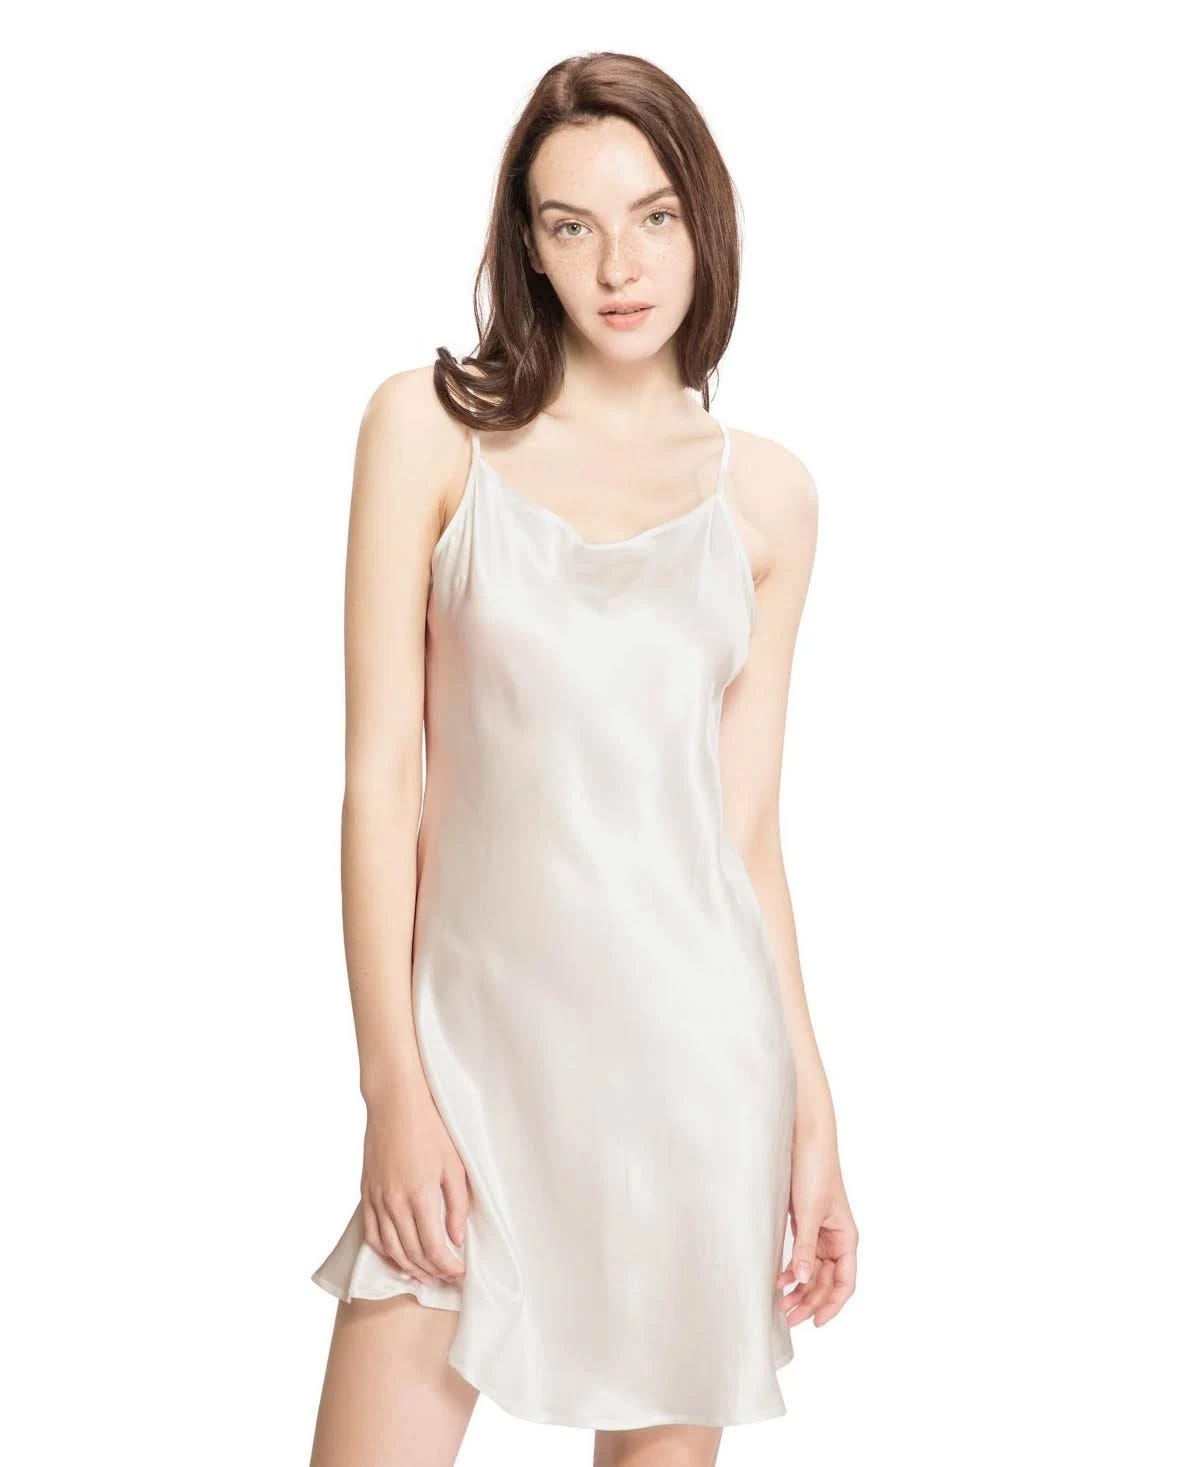 LilySilk Ivory Silk Chemise Nightgown for Women | Image